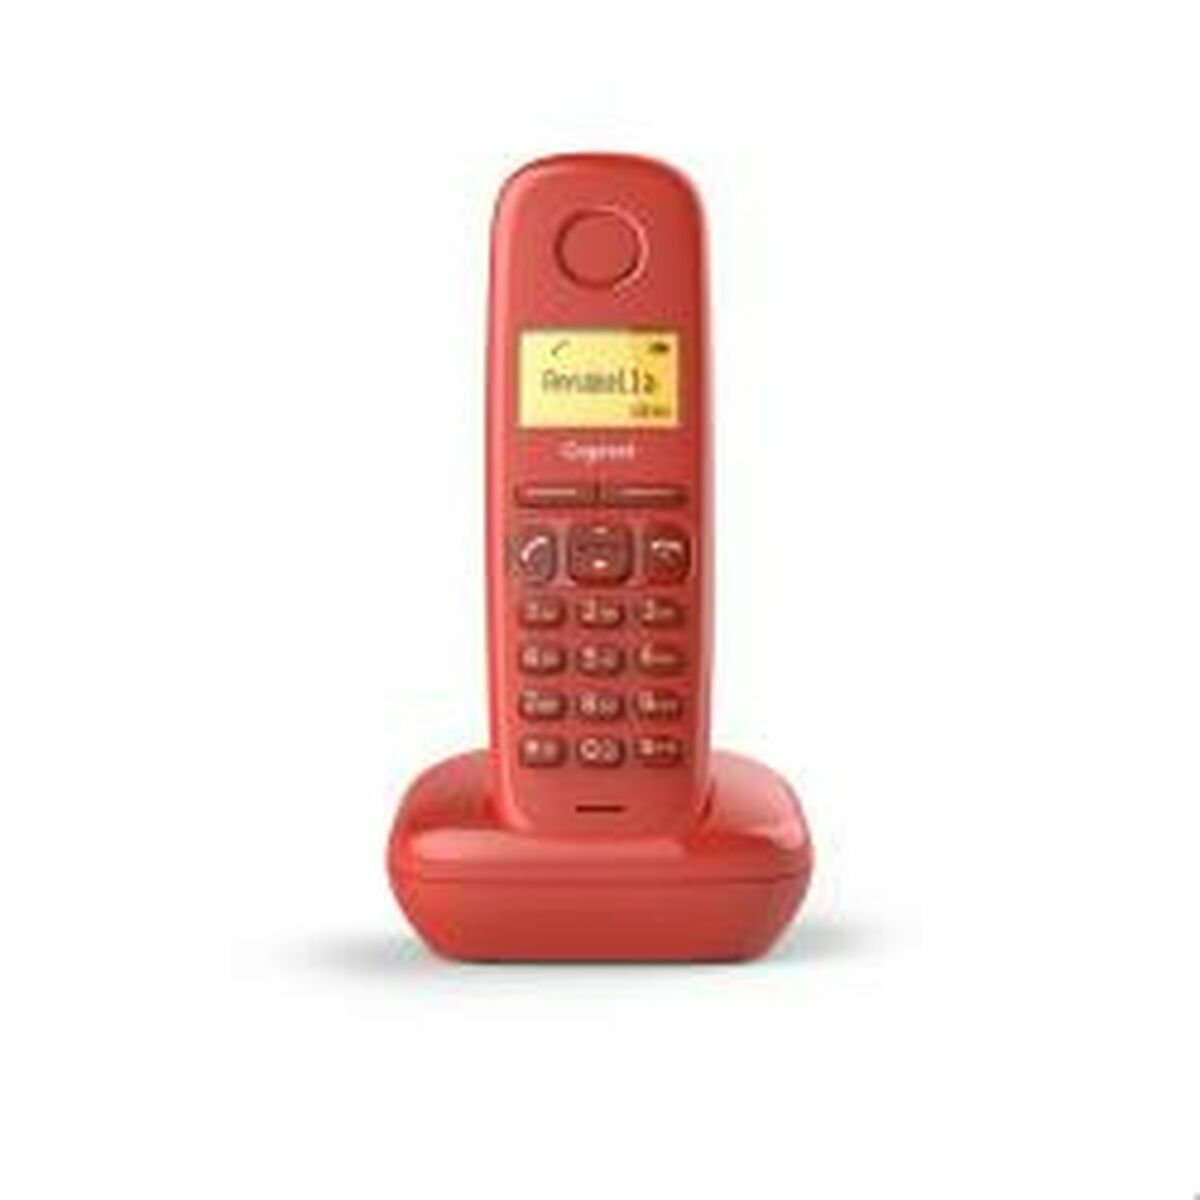 Wireless Phone Gigaset A180 Red, Gigaset, Electronics, Landline telephones and accessories, wireless-phone-gigaset-a180-red, Brand_Gigaset, category-reference-2609, category-reference-2617, category-reference-2619, category-reference-t-18372, category-reference-t-19653, Condition_NEW, office, Price_20 - 50, telephones & tablets, Teleworking, RiotNook